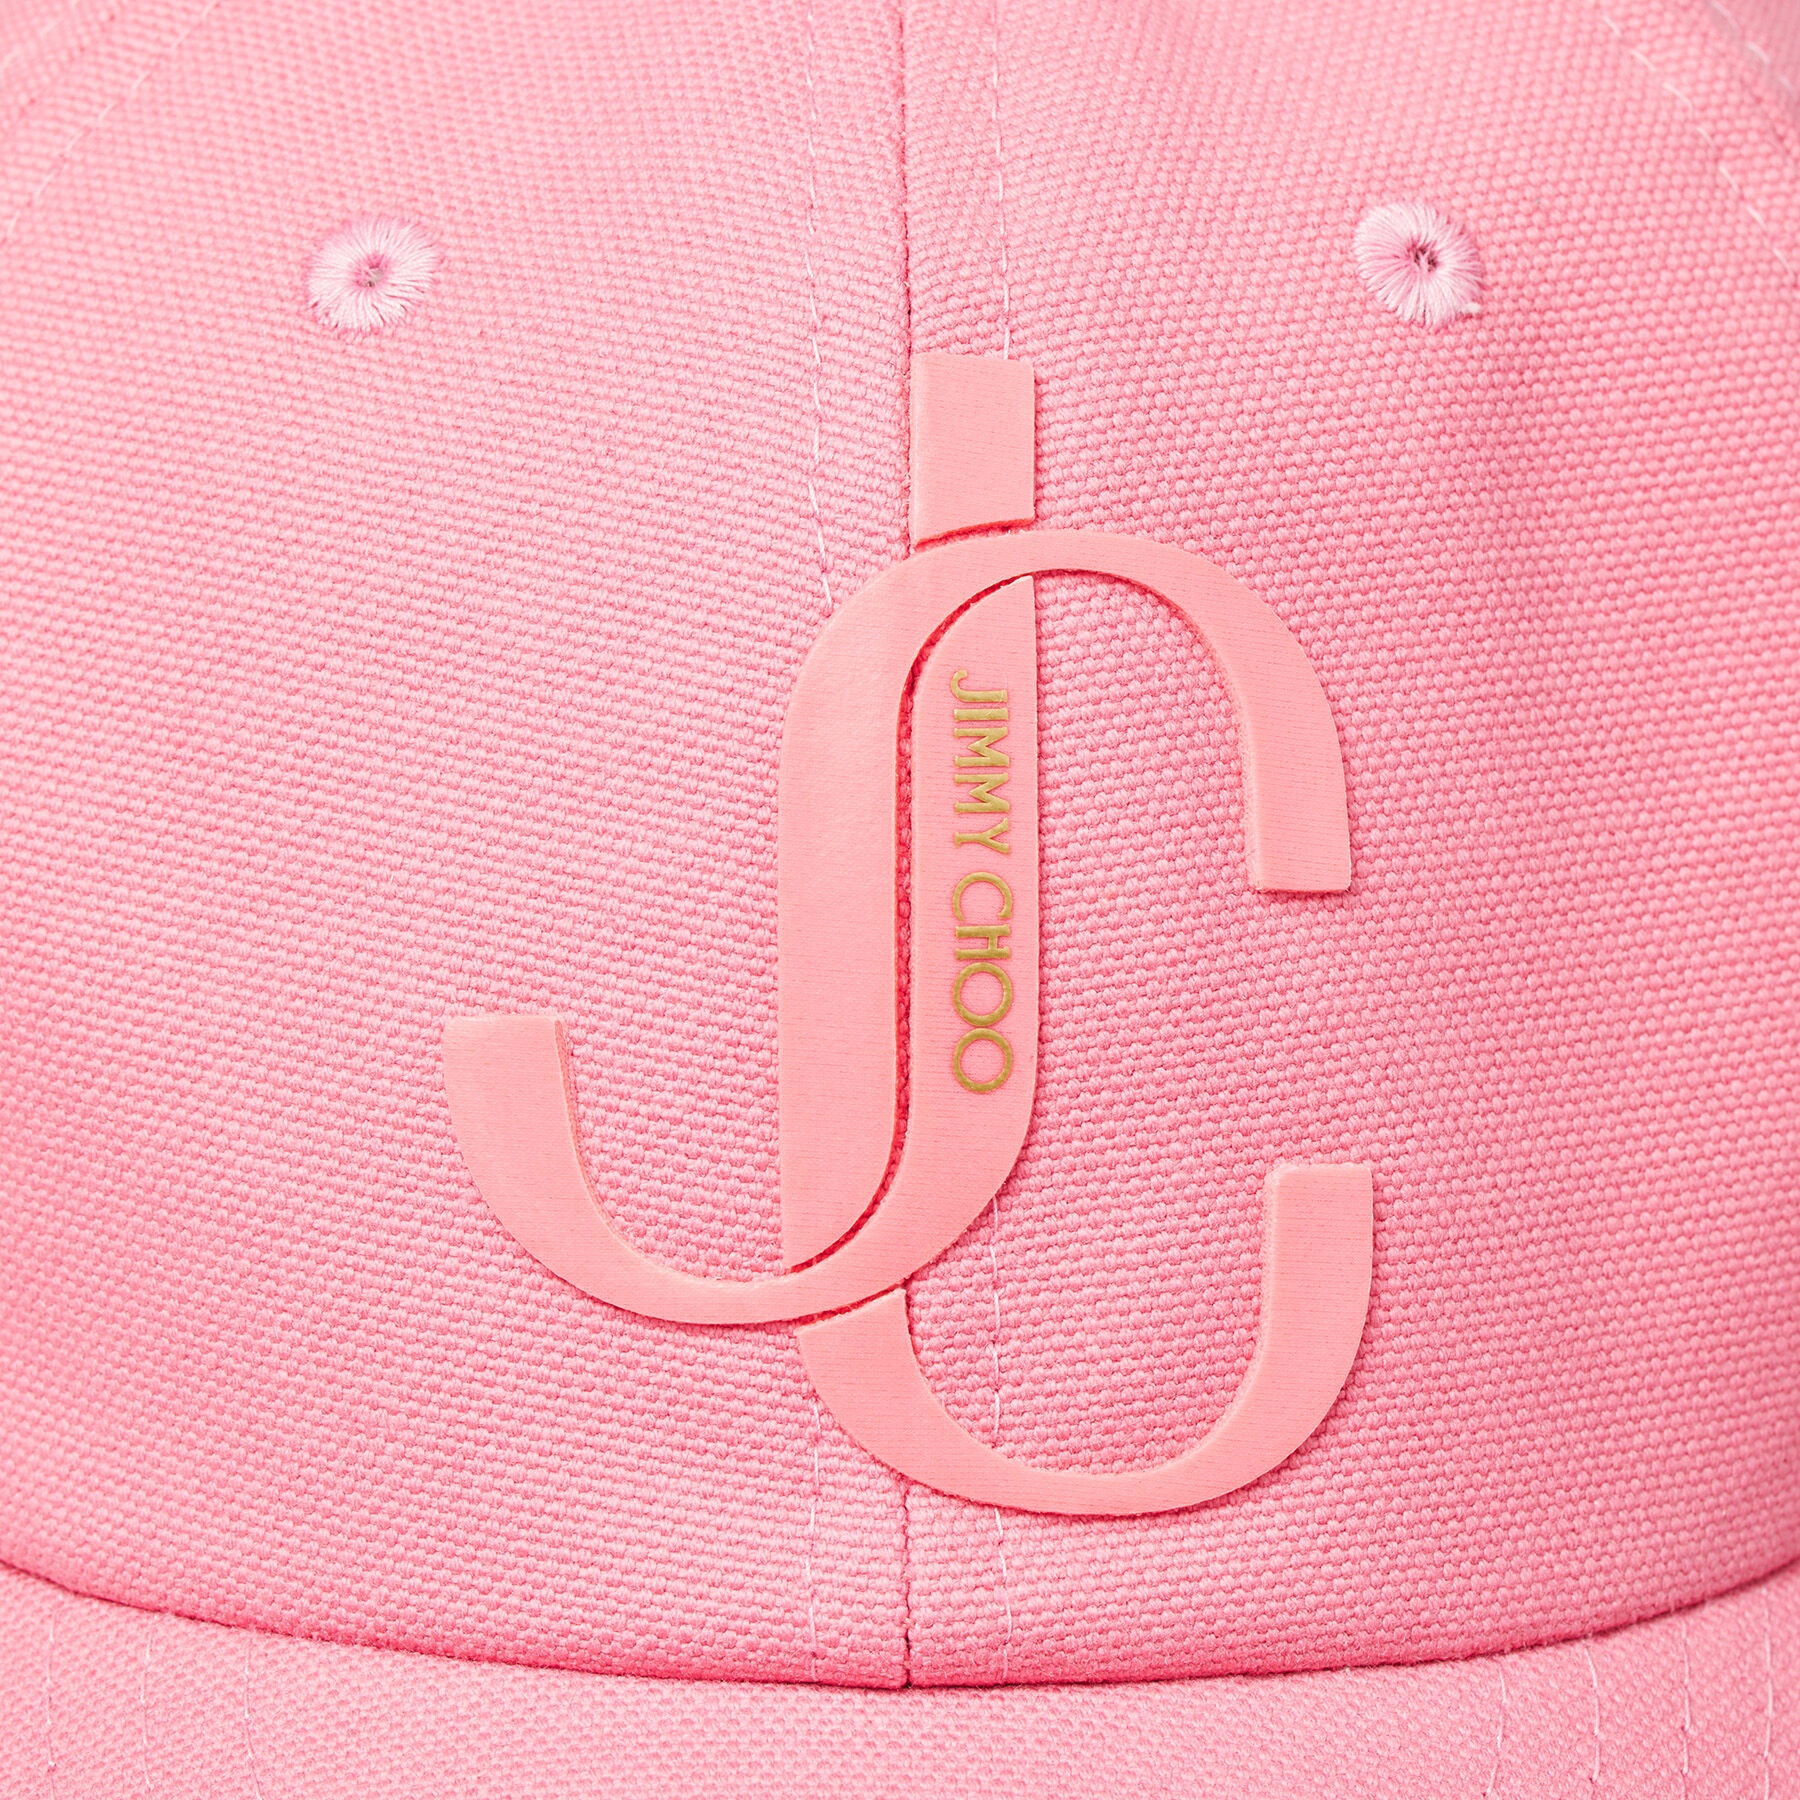 Paxy
Candy Pink Cotton Baseball Cap with Shiny JC Monogram - 4